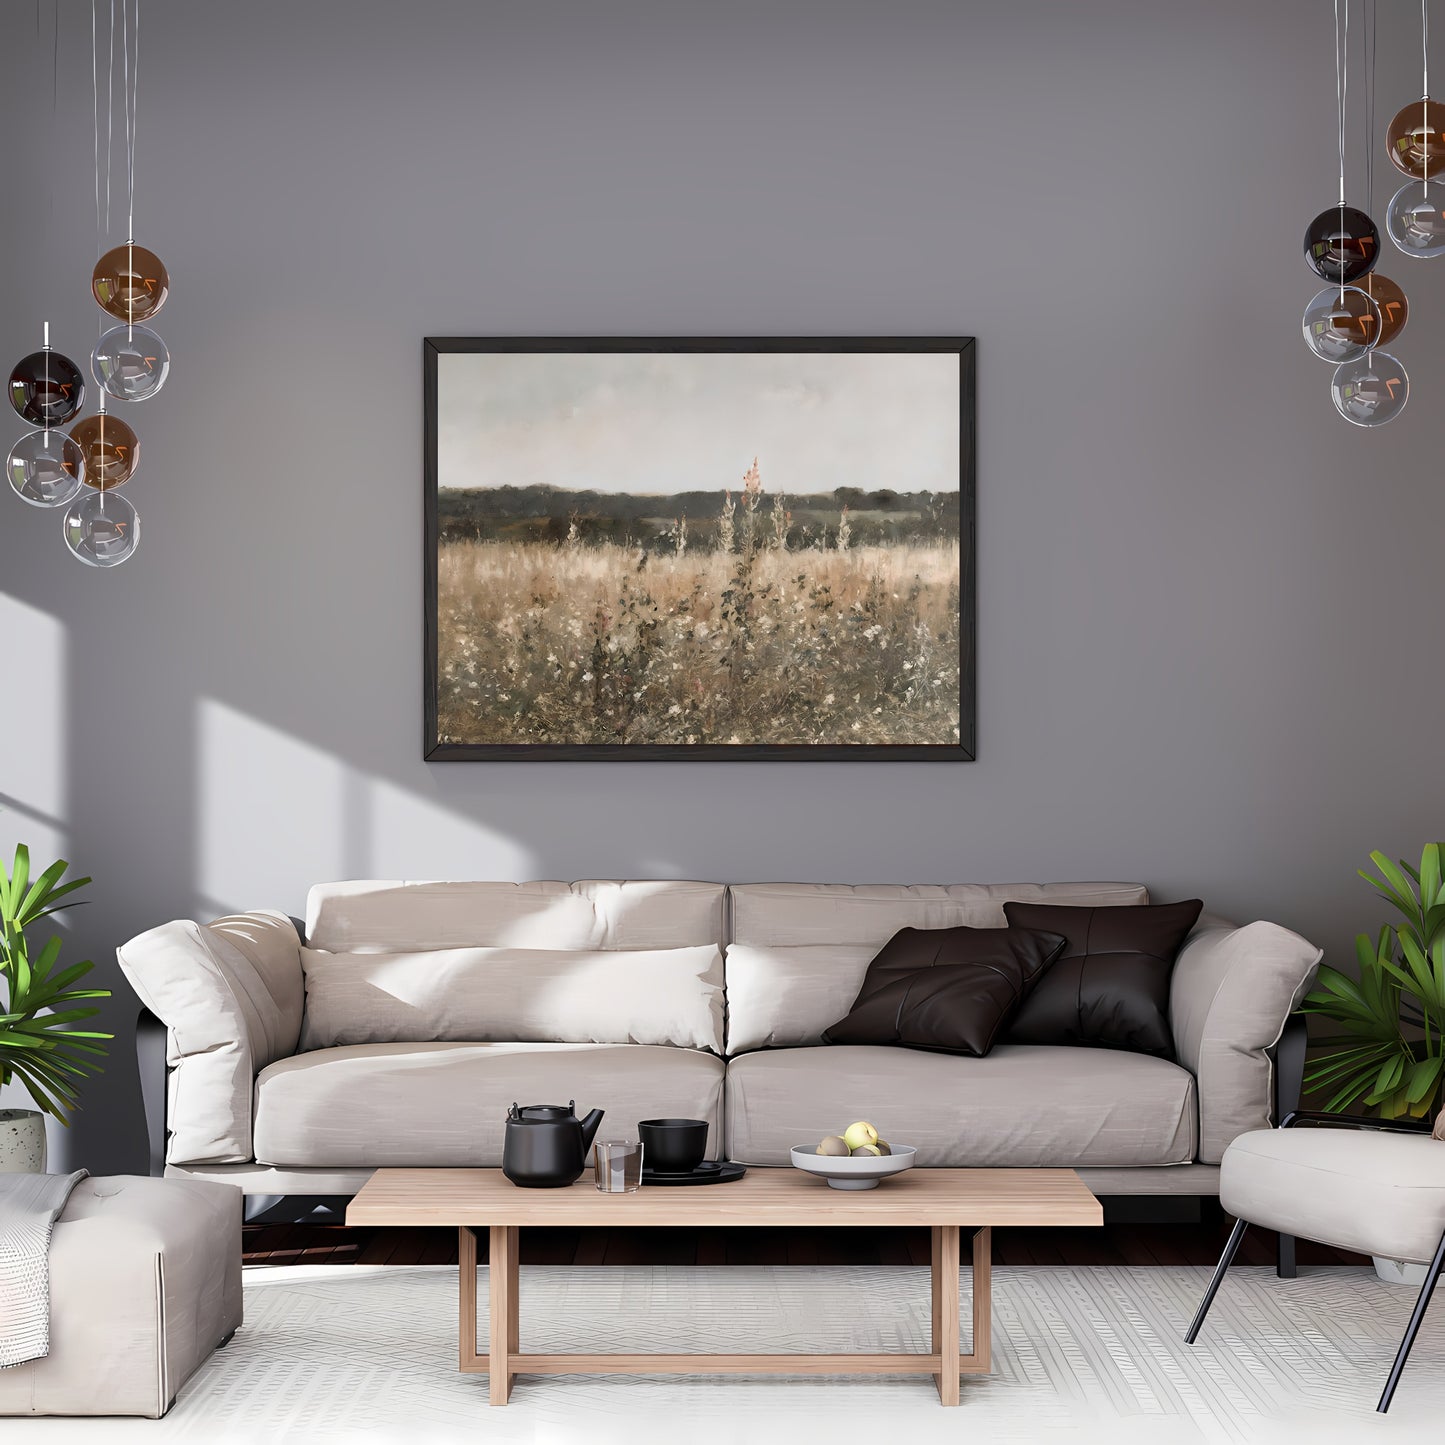 Wildflower Field Landscape Paper Poster Prints Vintage Painting Antique Landscape Art Print Country Field Wall Art Living Room Decor